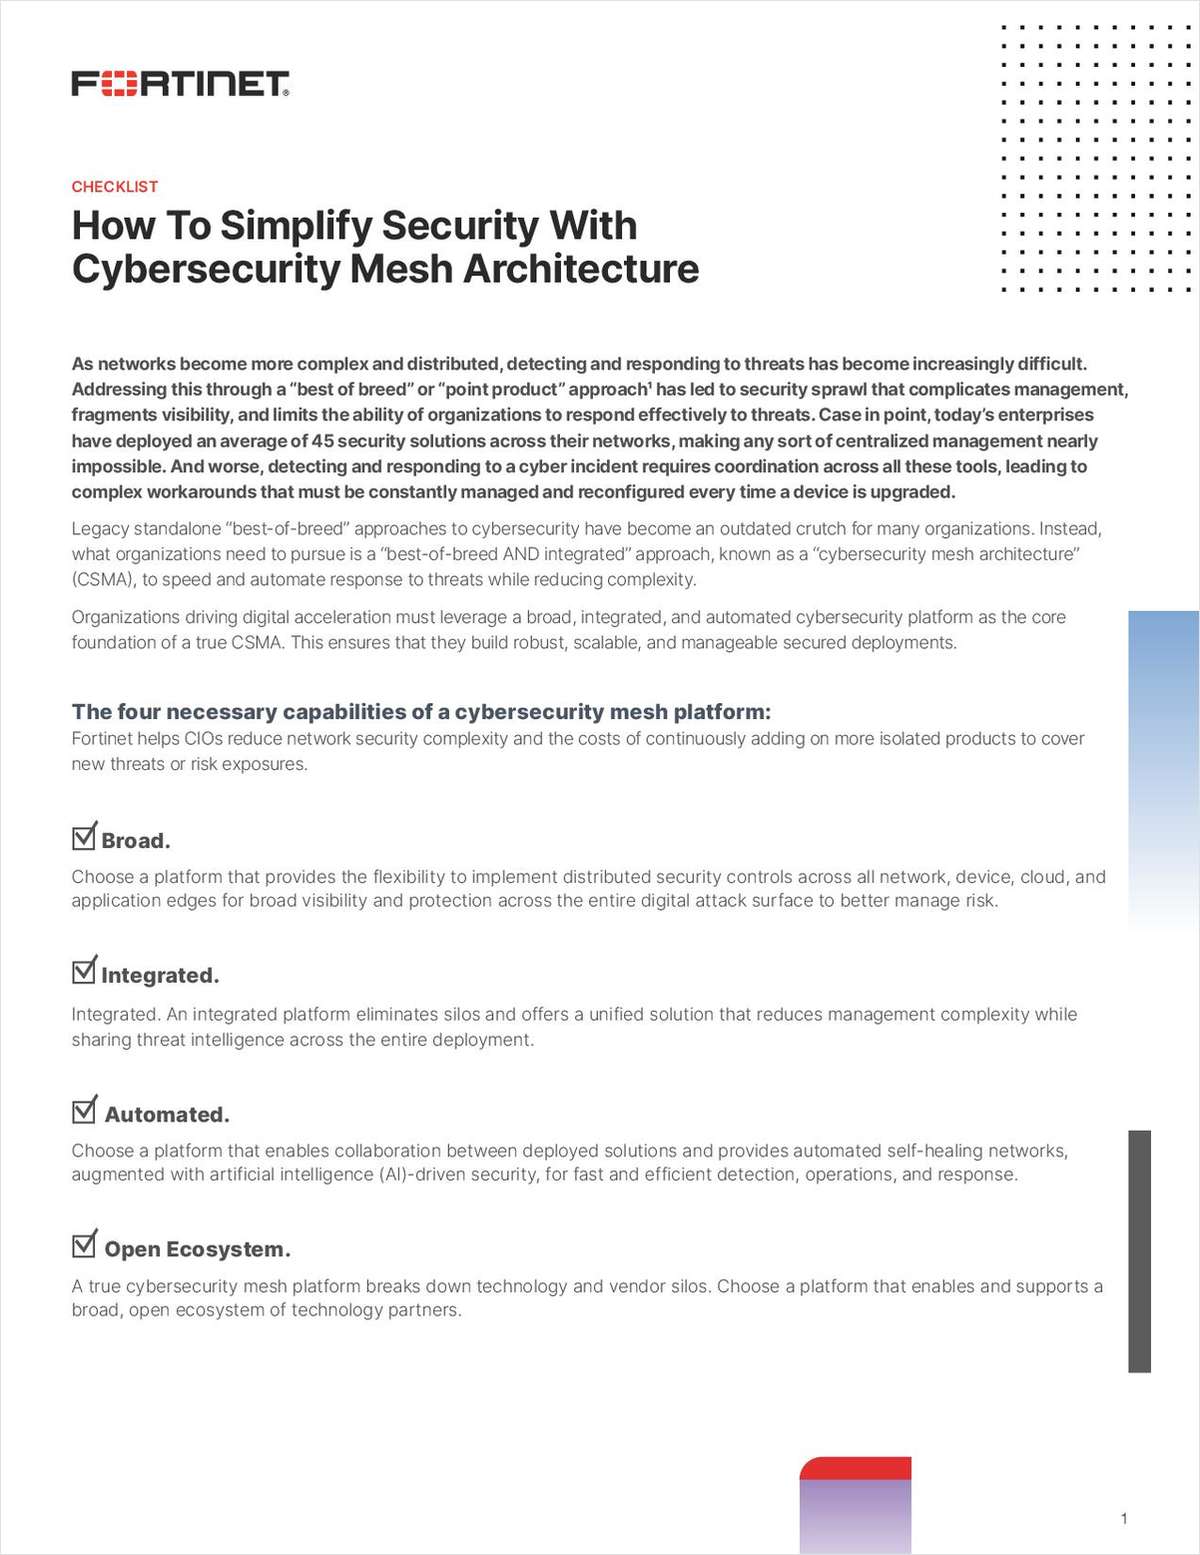 How to Simplify Security with a Cybersecurity Mesh Architecture